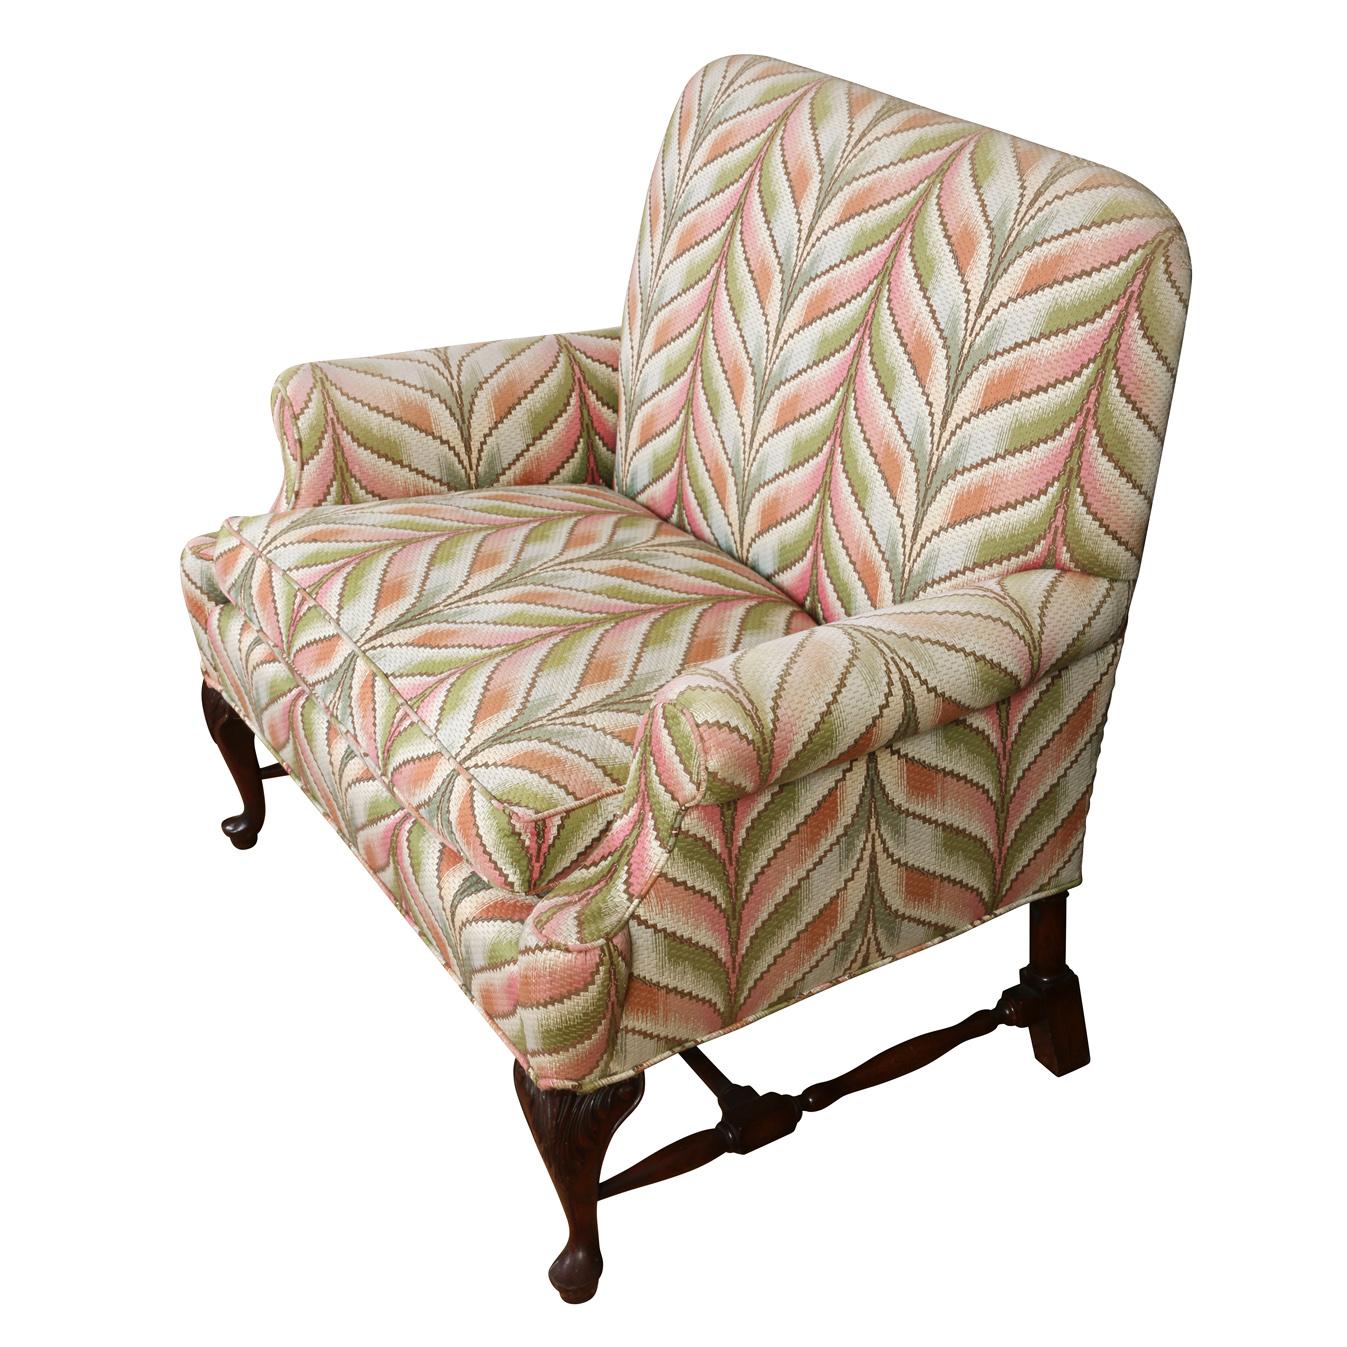 A vintage George II style settee upholstered in green and apricot ikat chevron motif with cabriole mahogany legs.